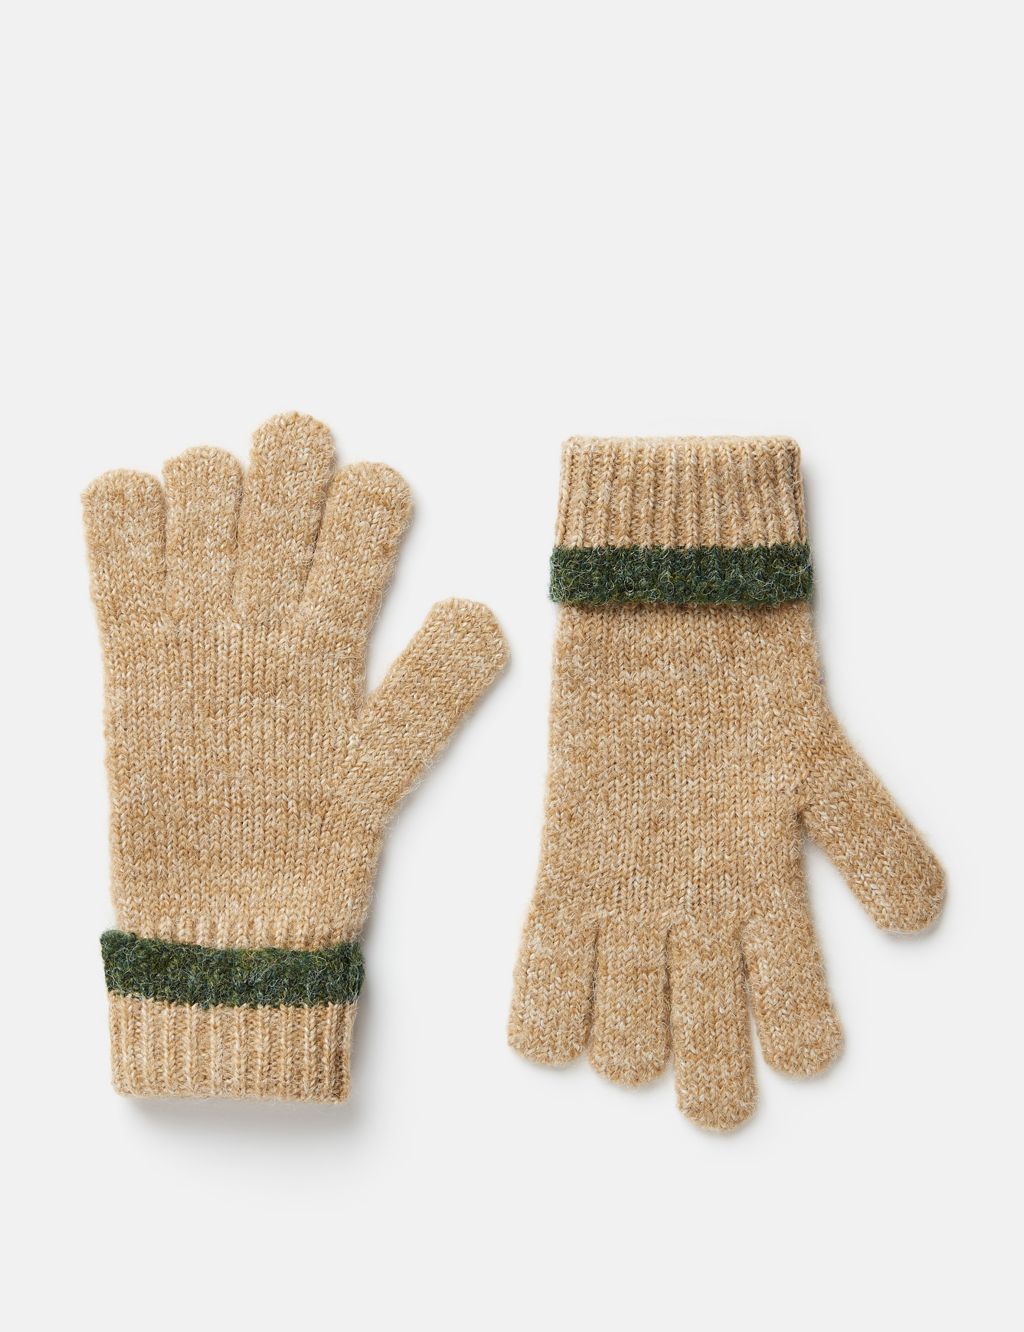 Kids' Knitted Gloves image 1